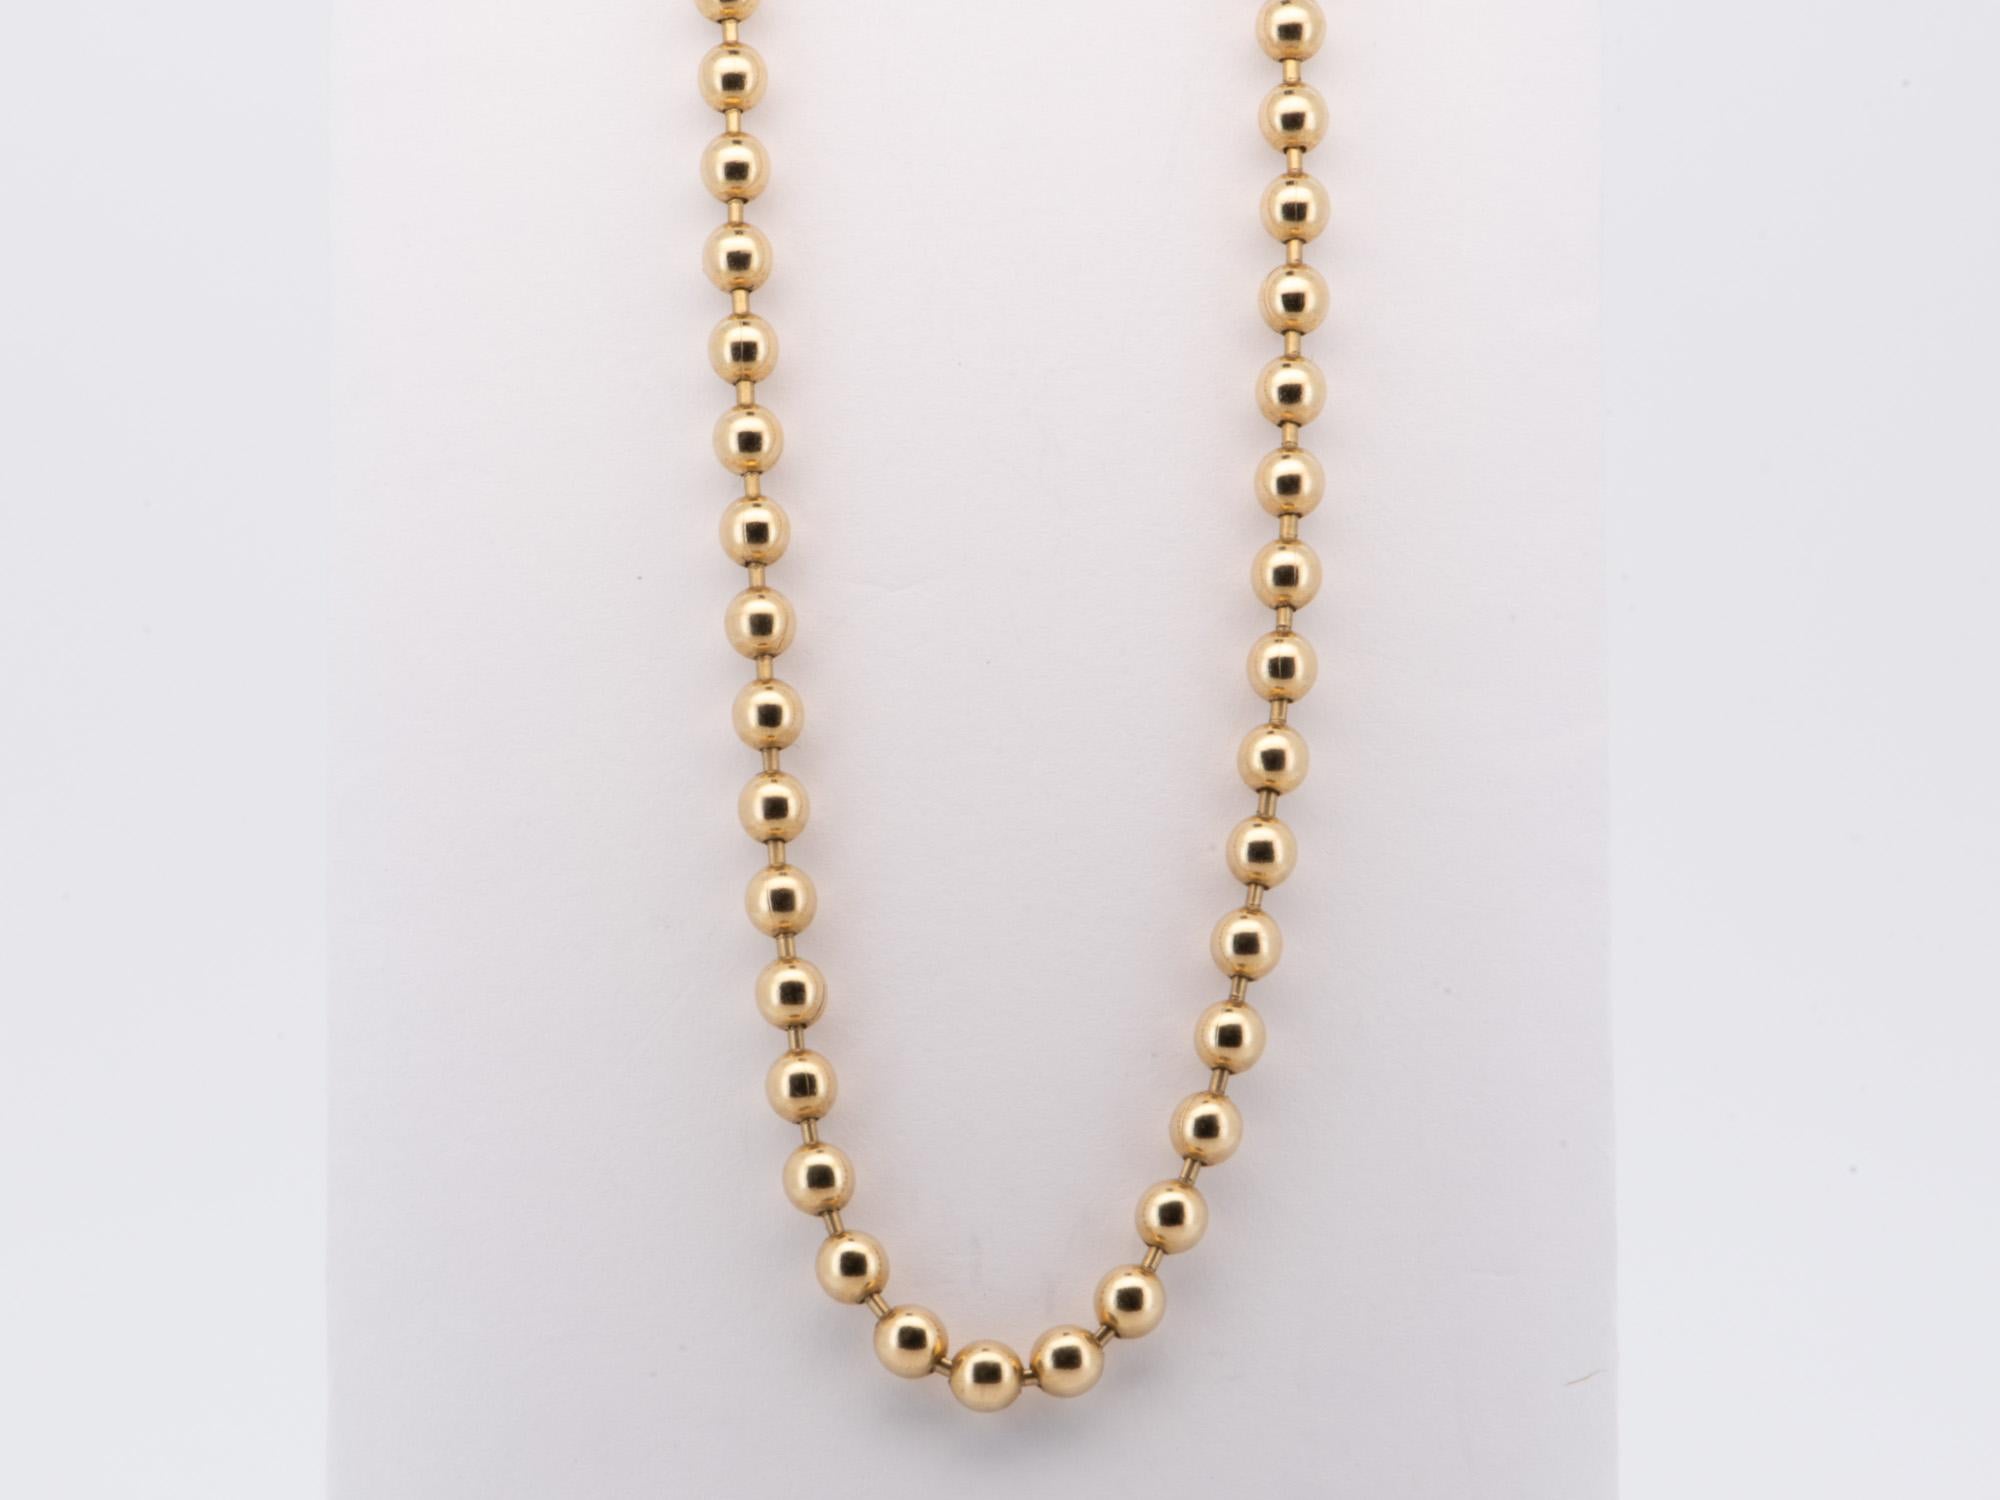 ♥ Gorgeous necklace chain strung with 3mm size gold beads
♥ This necklace features a double-clasp closure, allowing you to connect this to any charm holders, annex links, or other chains easily

♥ Material: 18K gold, over 14g
♥ Length: 20